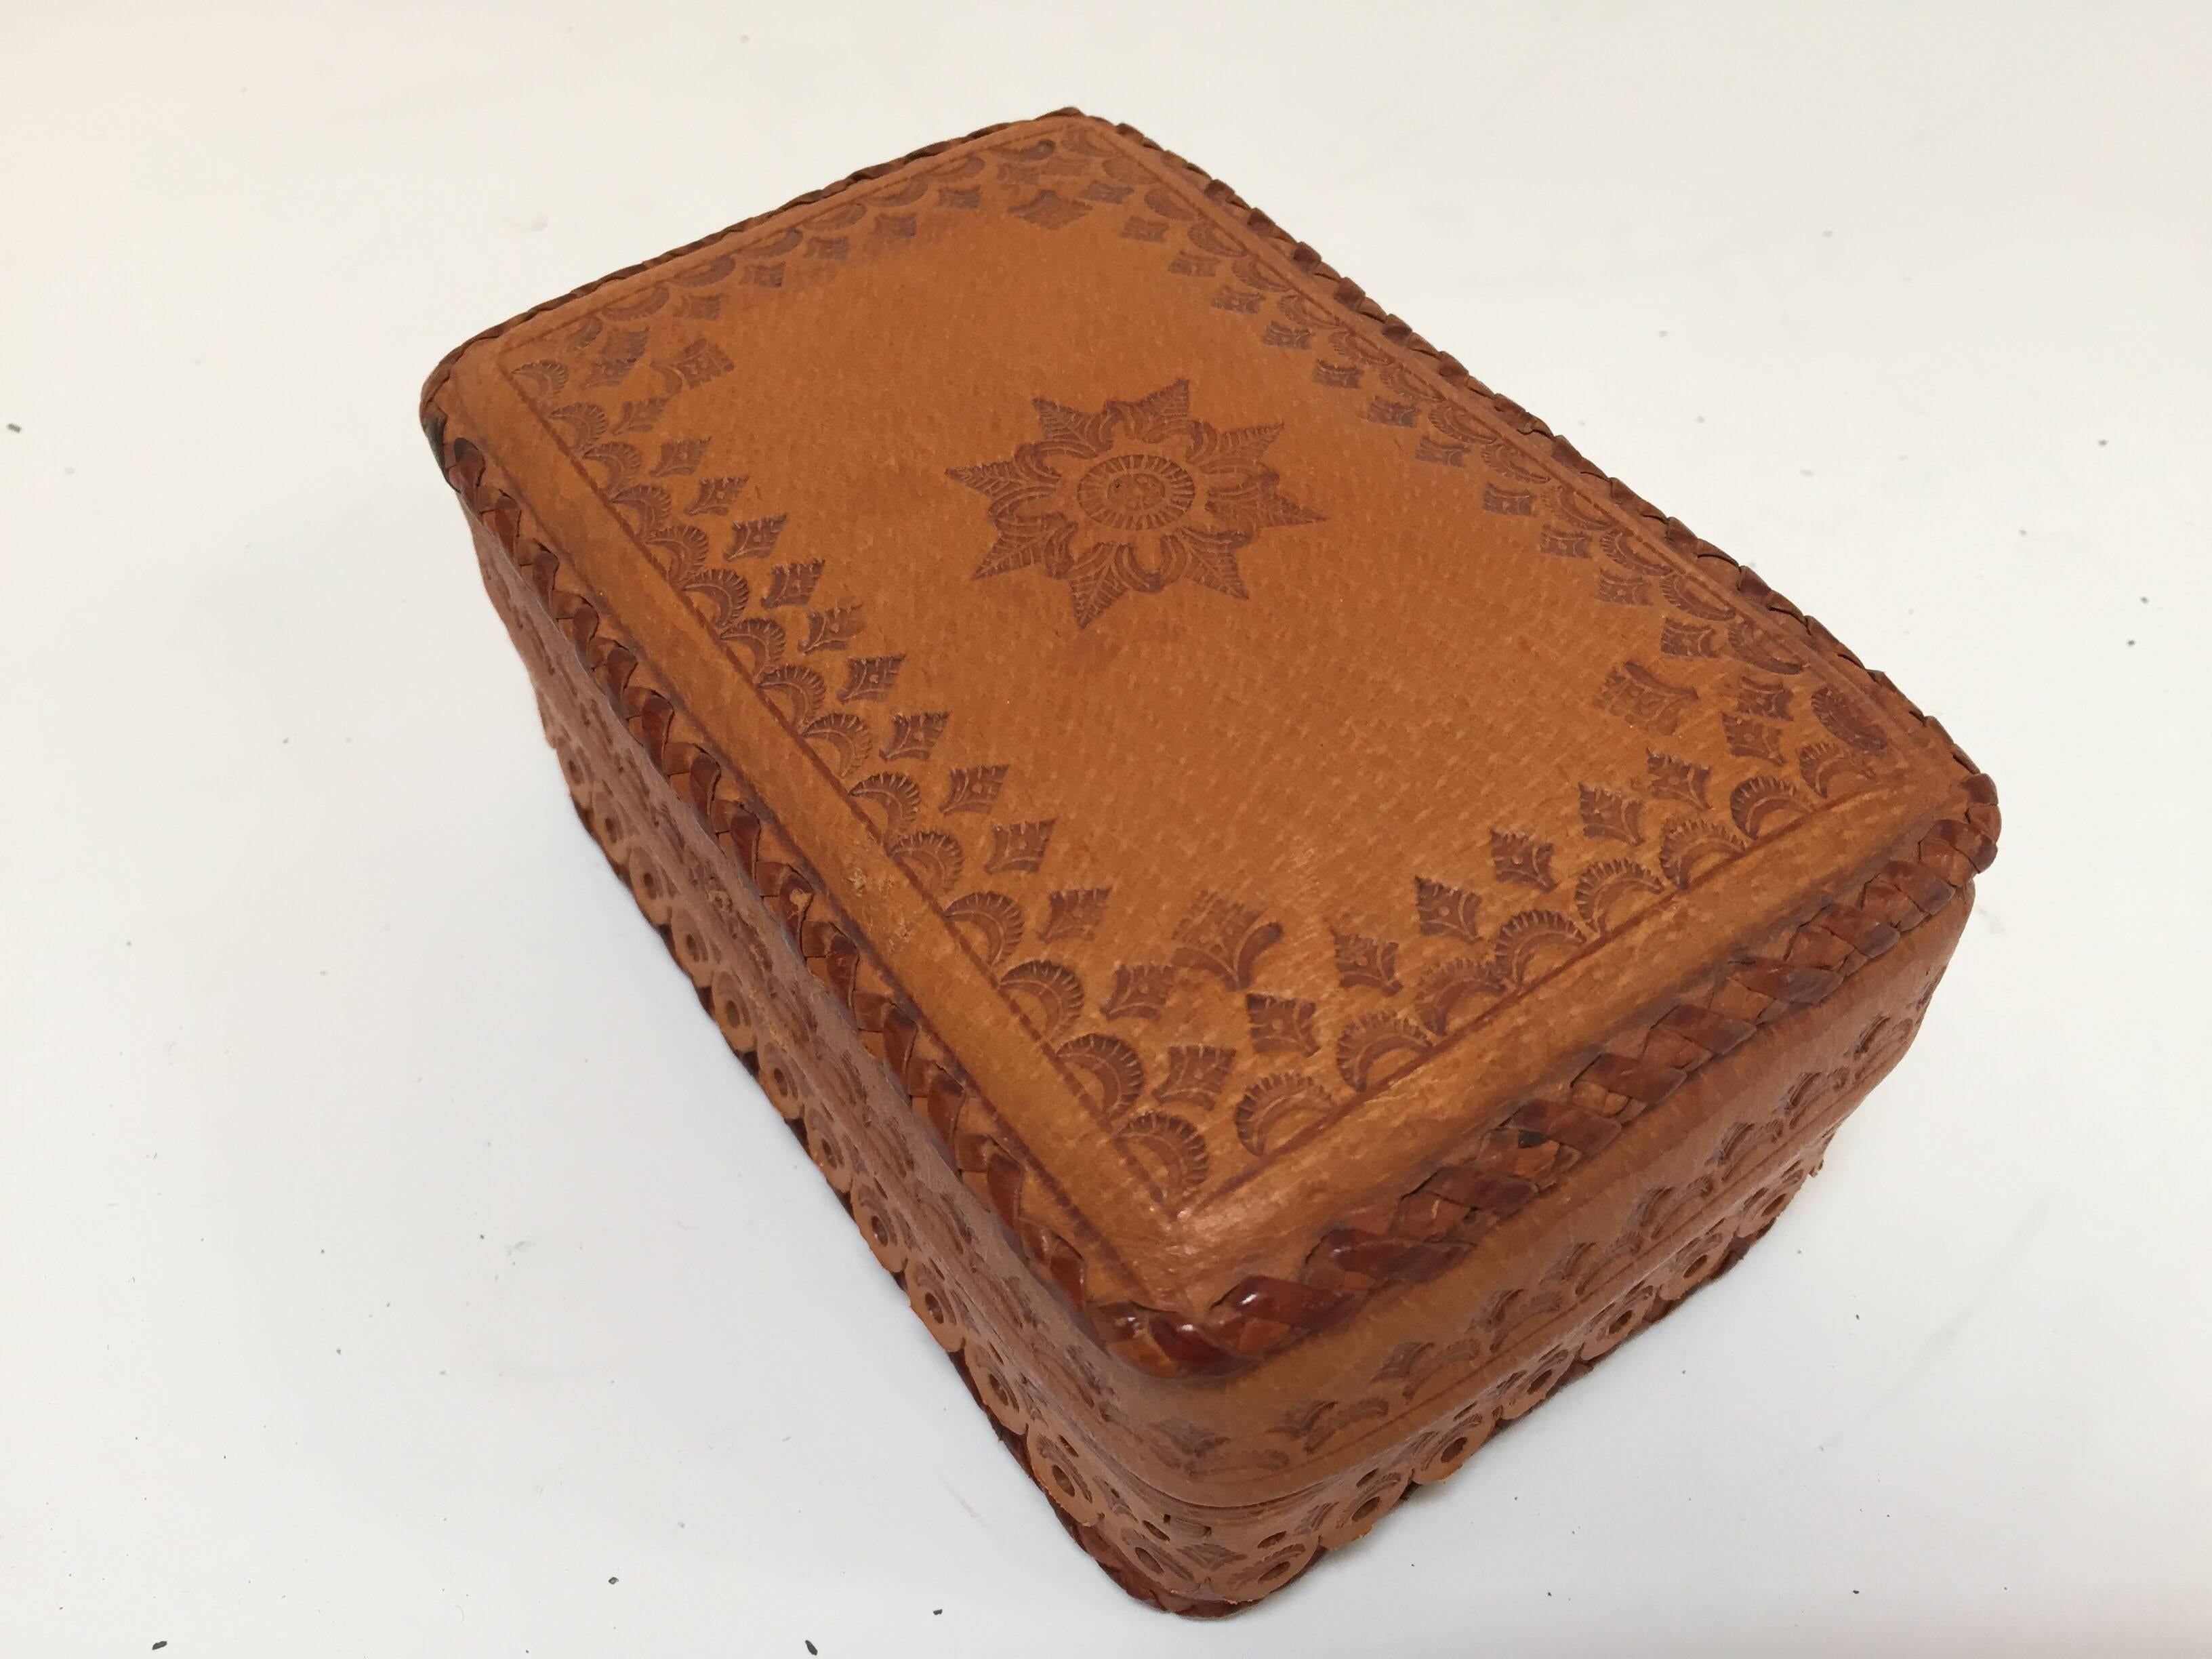 Moroccan Leather Vintage Brown Box Hand Tooled in Morocco with Tribal African Designs